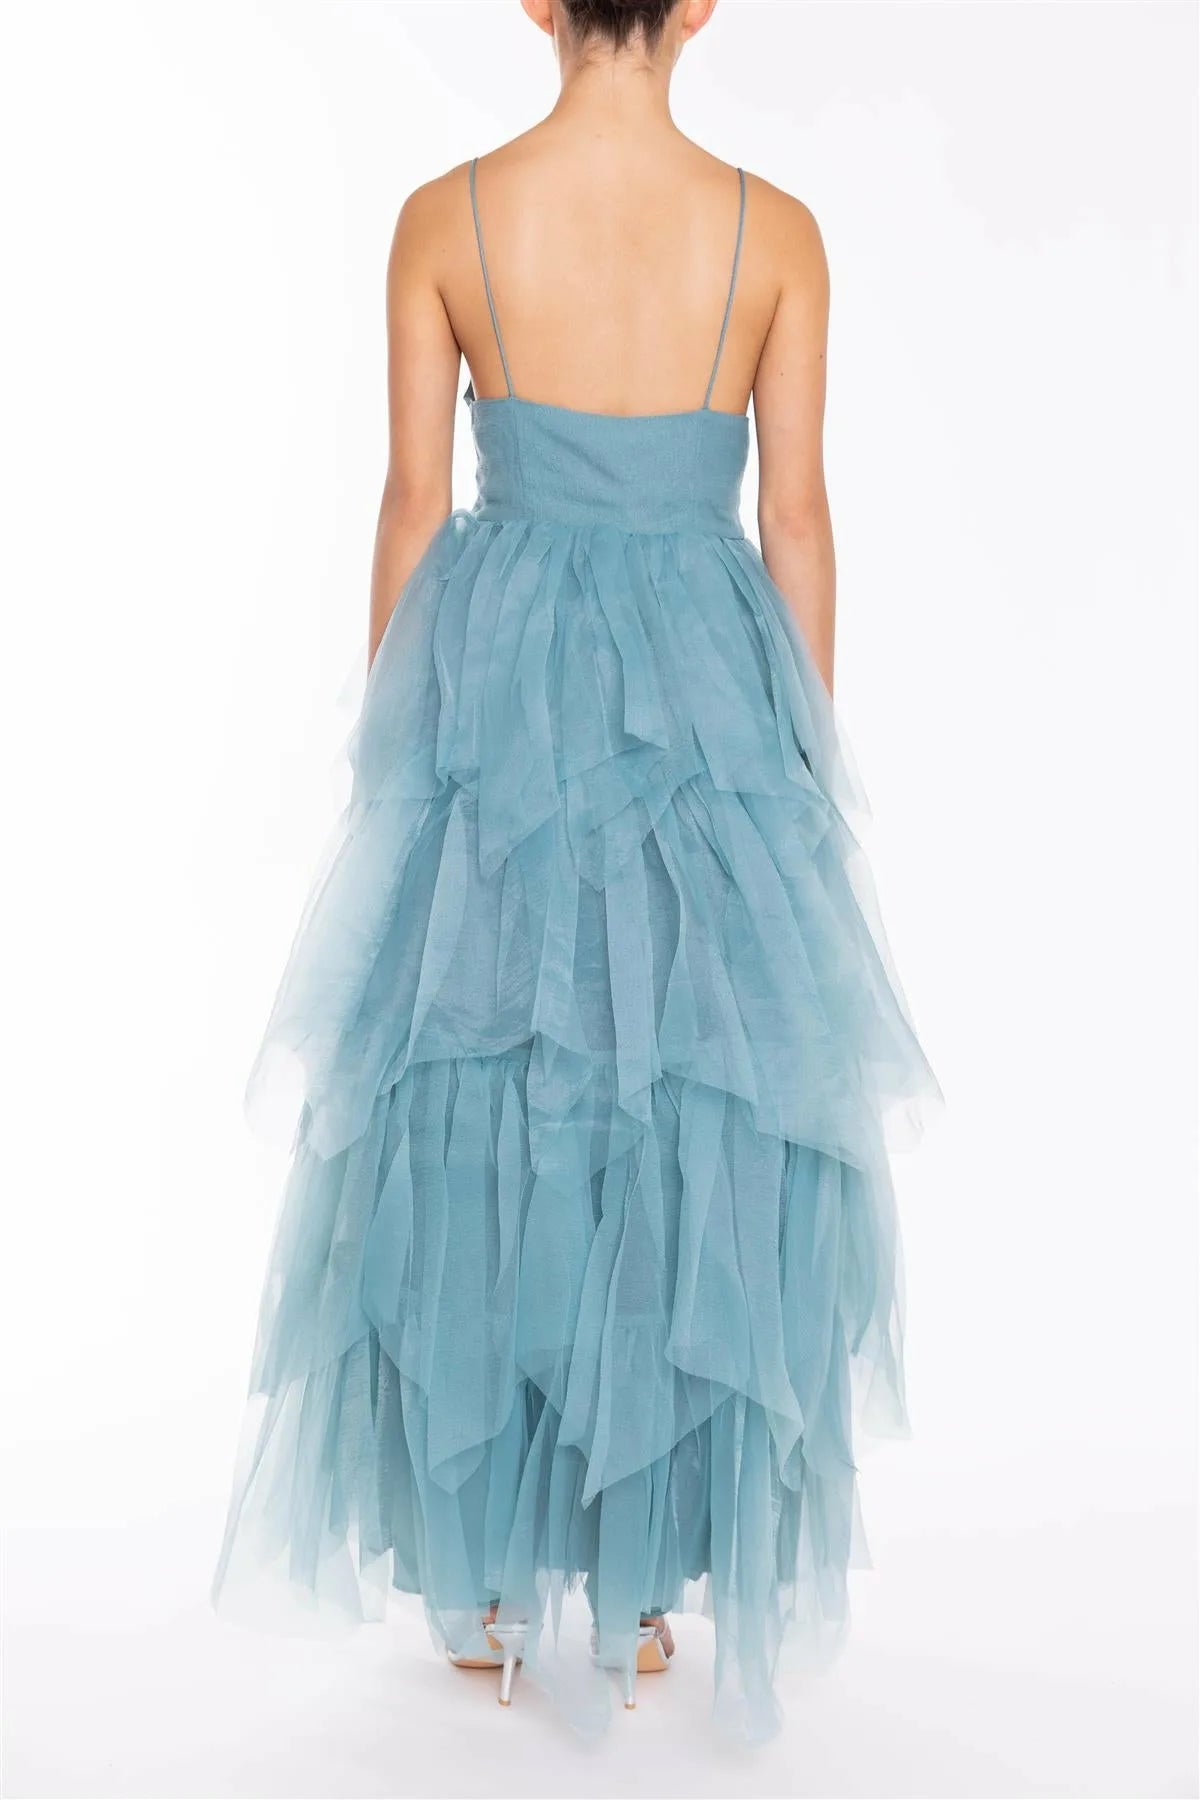 True Decadence Saige Mineral Blue V-neck Tiered Tulle Maxi Dress